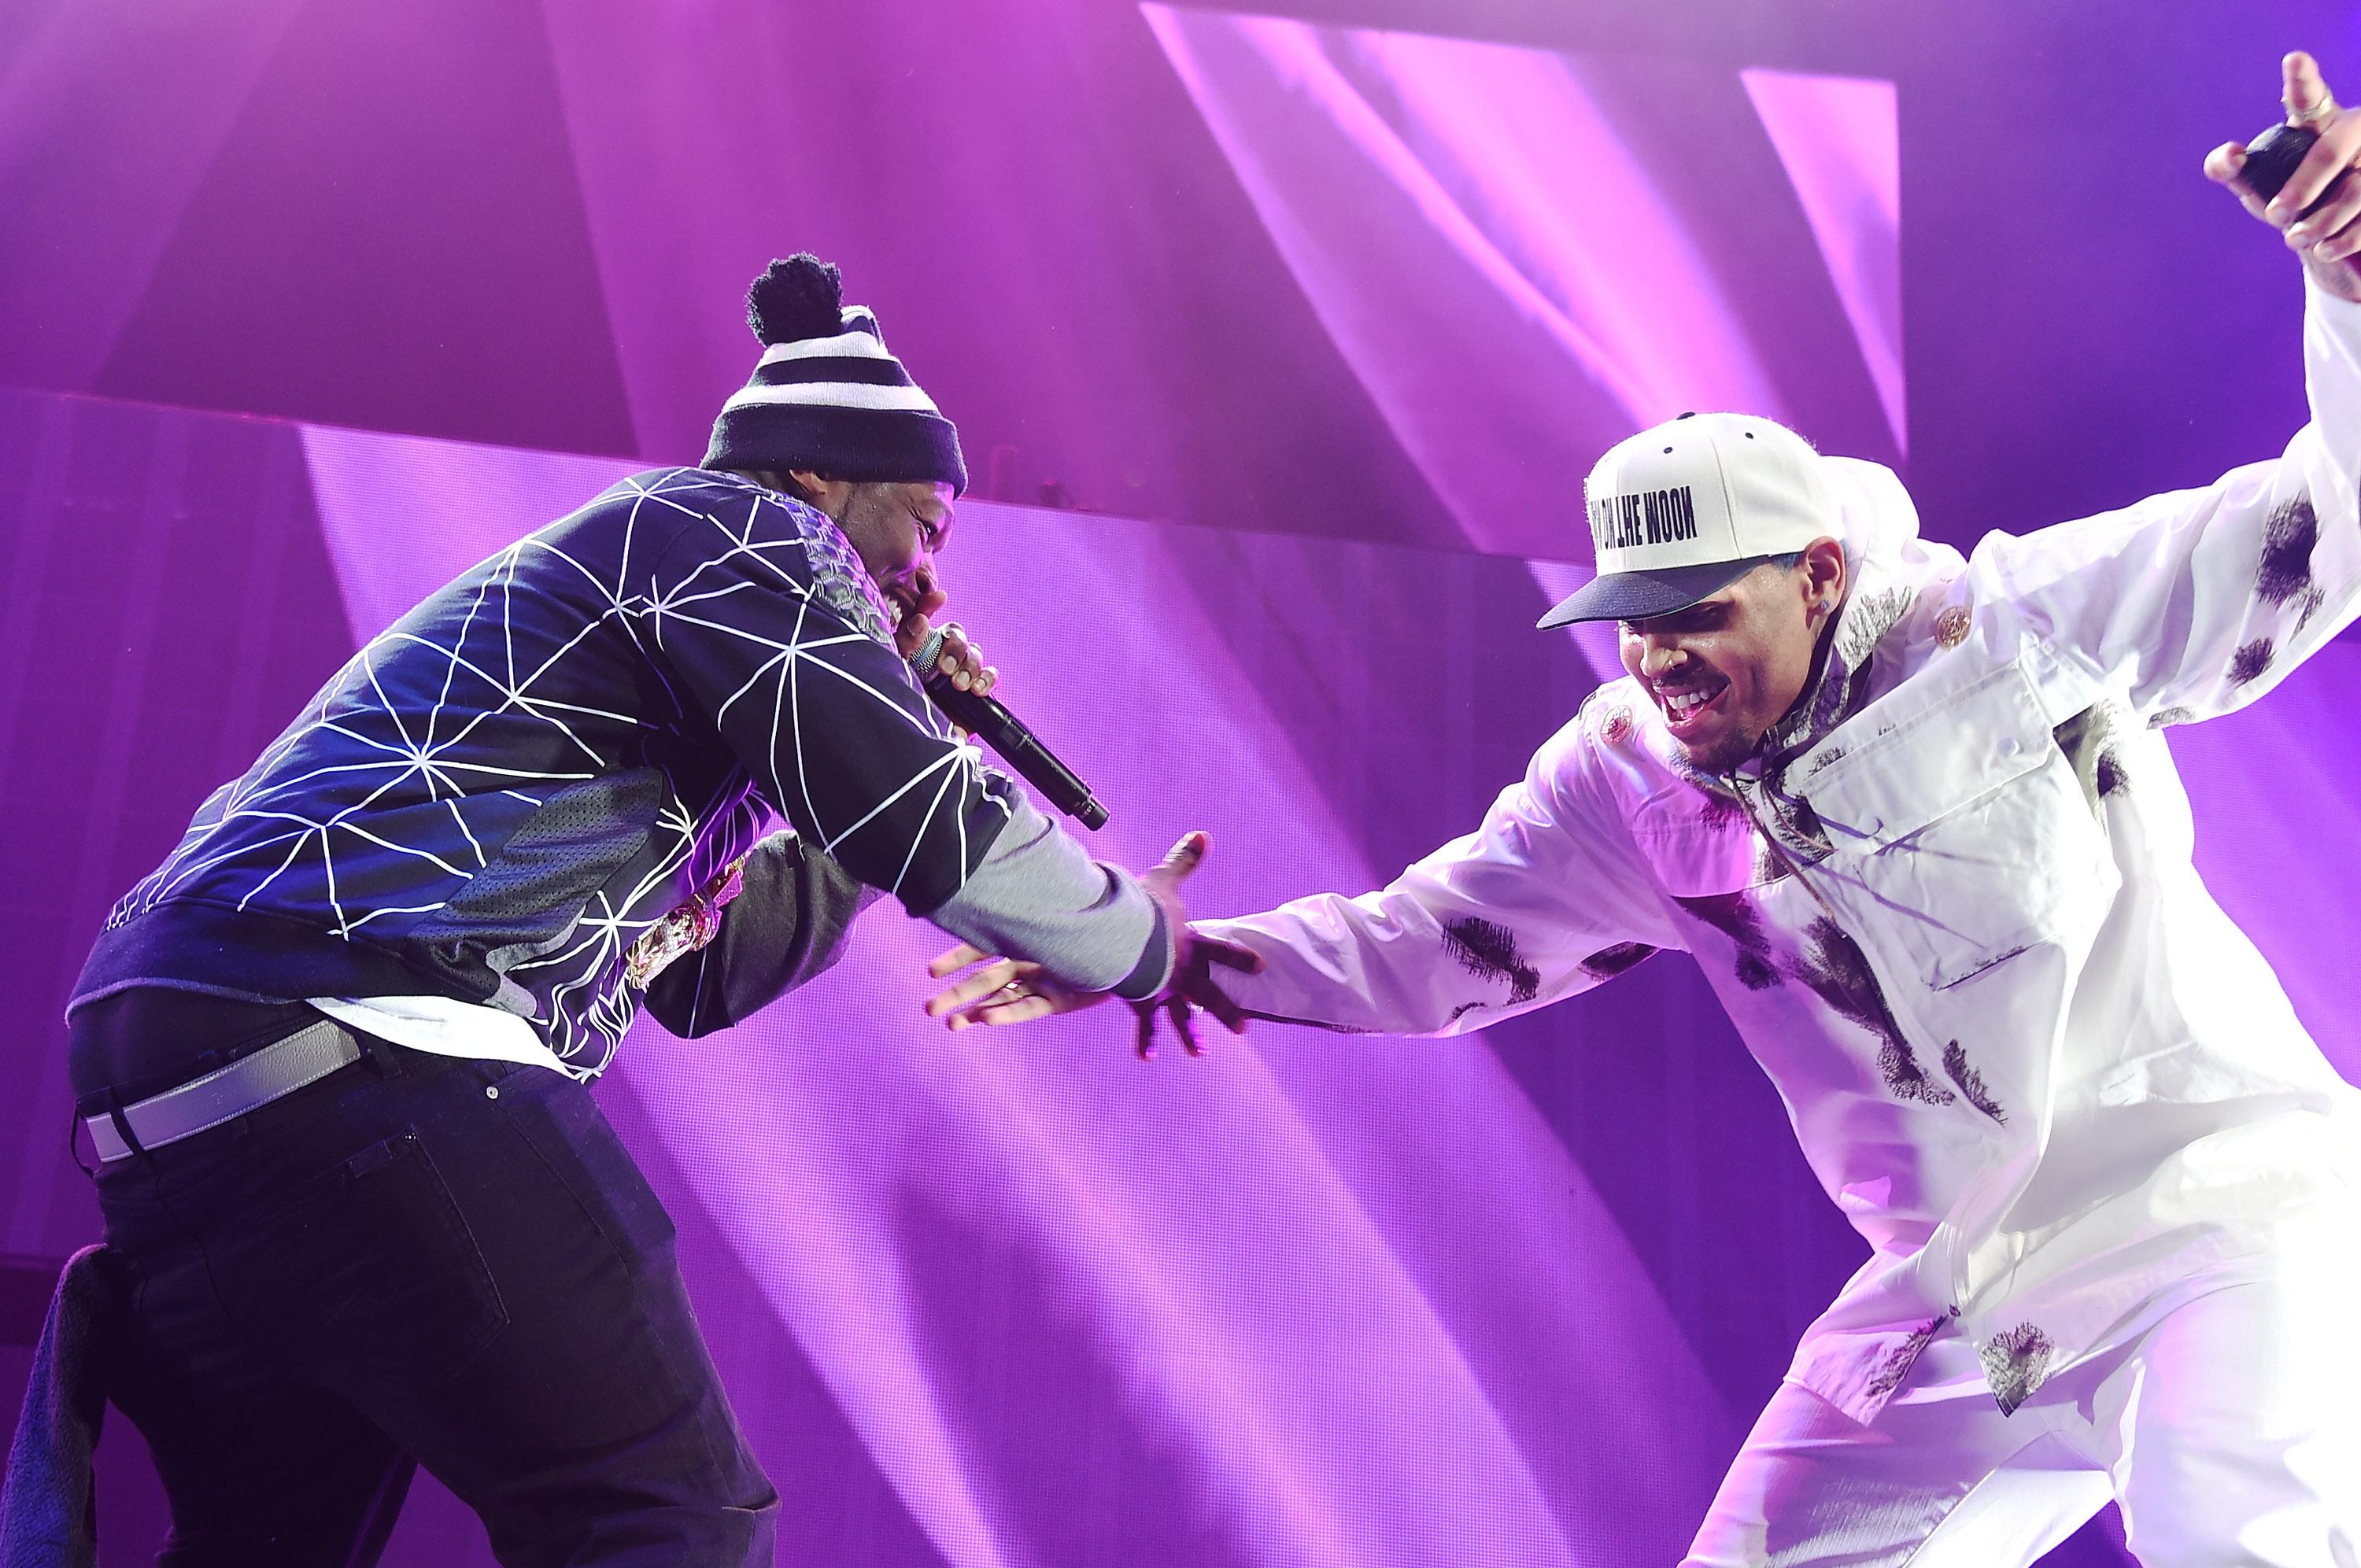 50 Cent Says Chris Brown Is The New King of Pop, ‘Better’ Than Michael Jackson